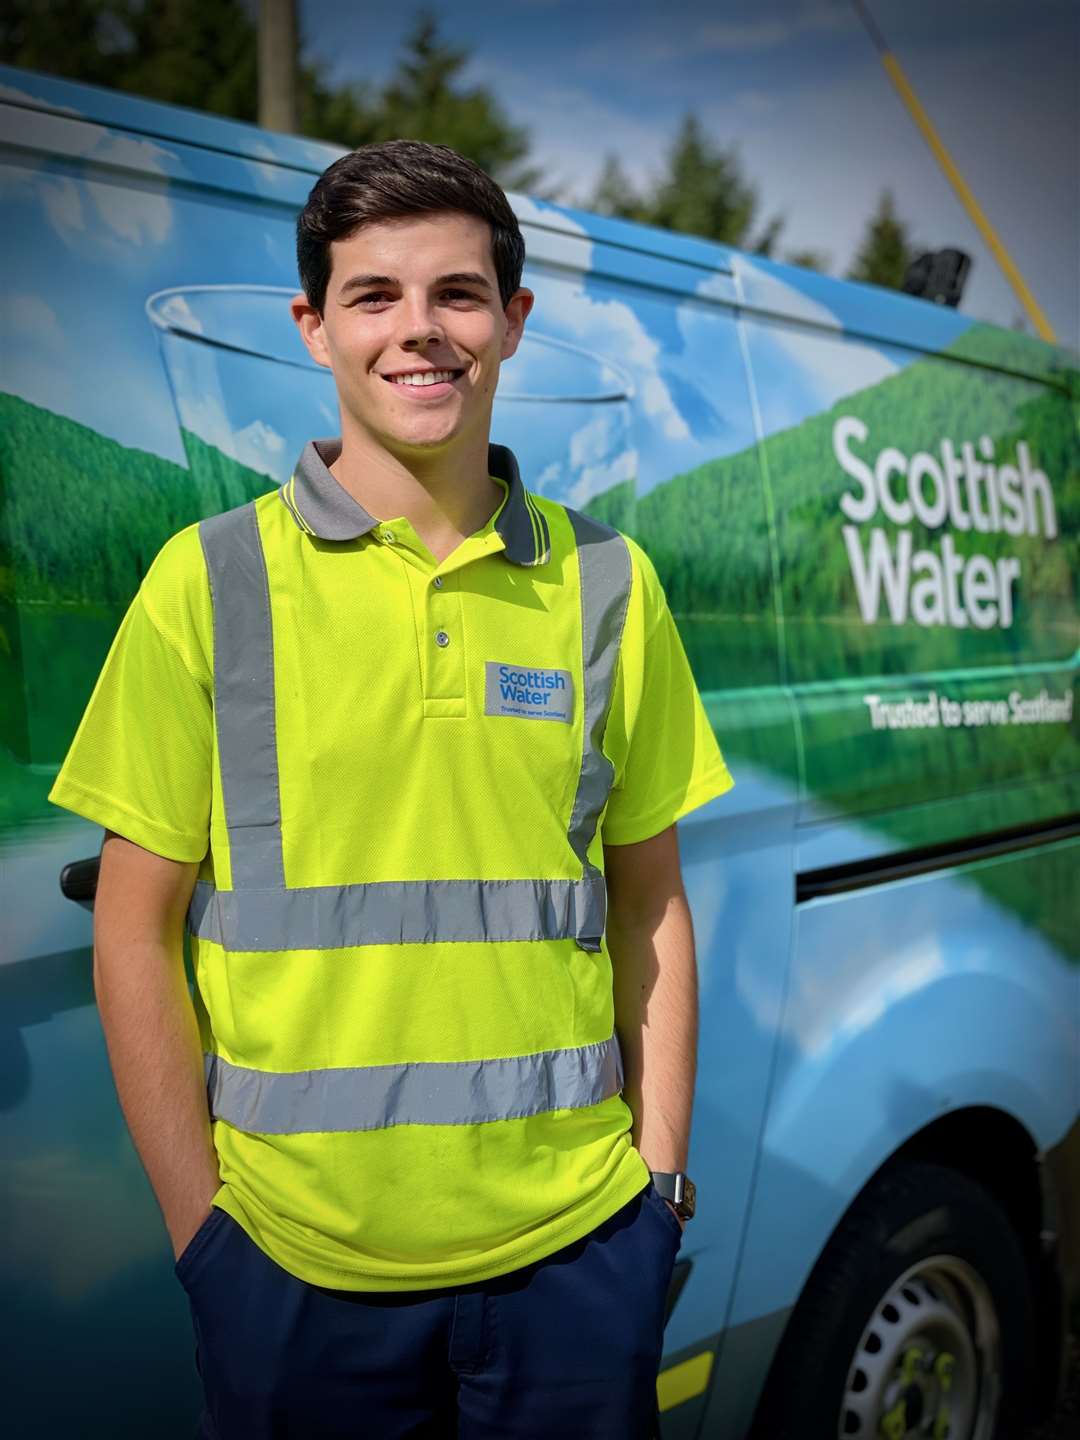 Scottish Water is making 60 apprenticeship opportunities available.